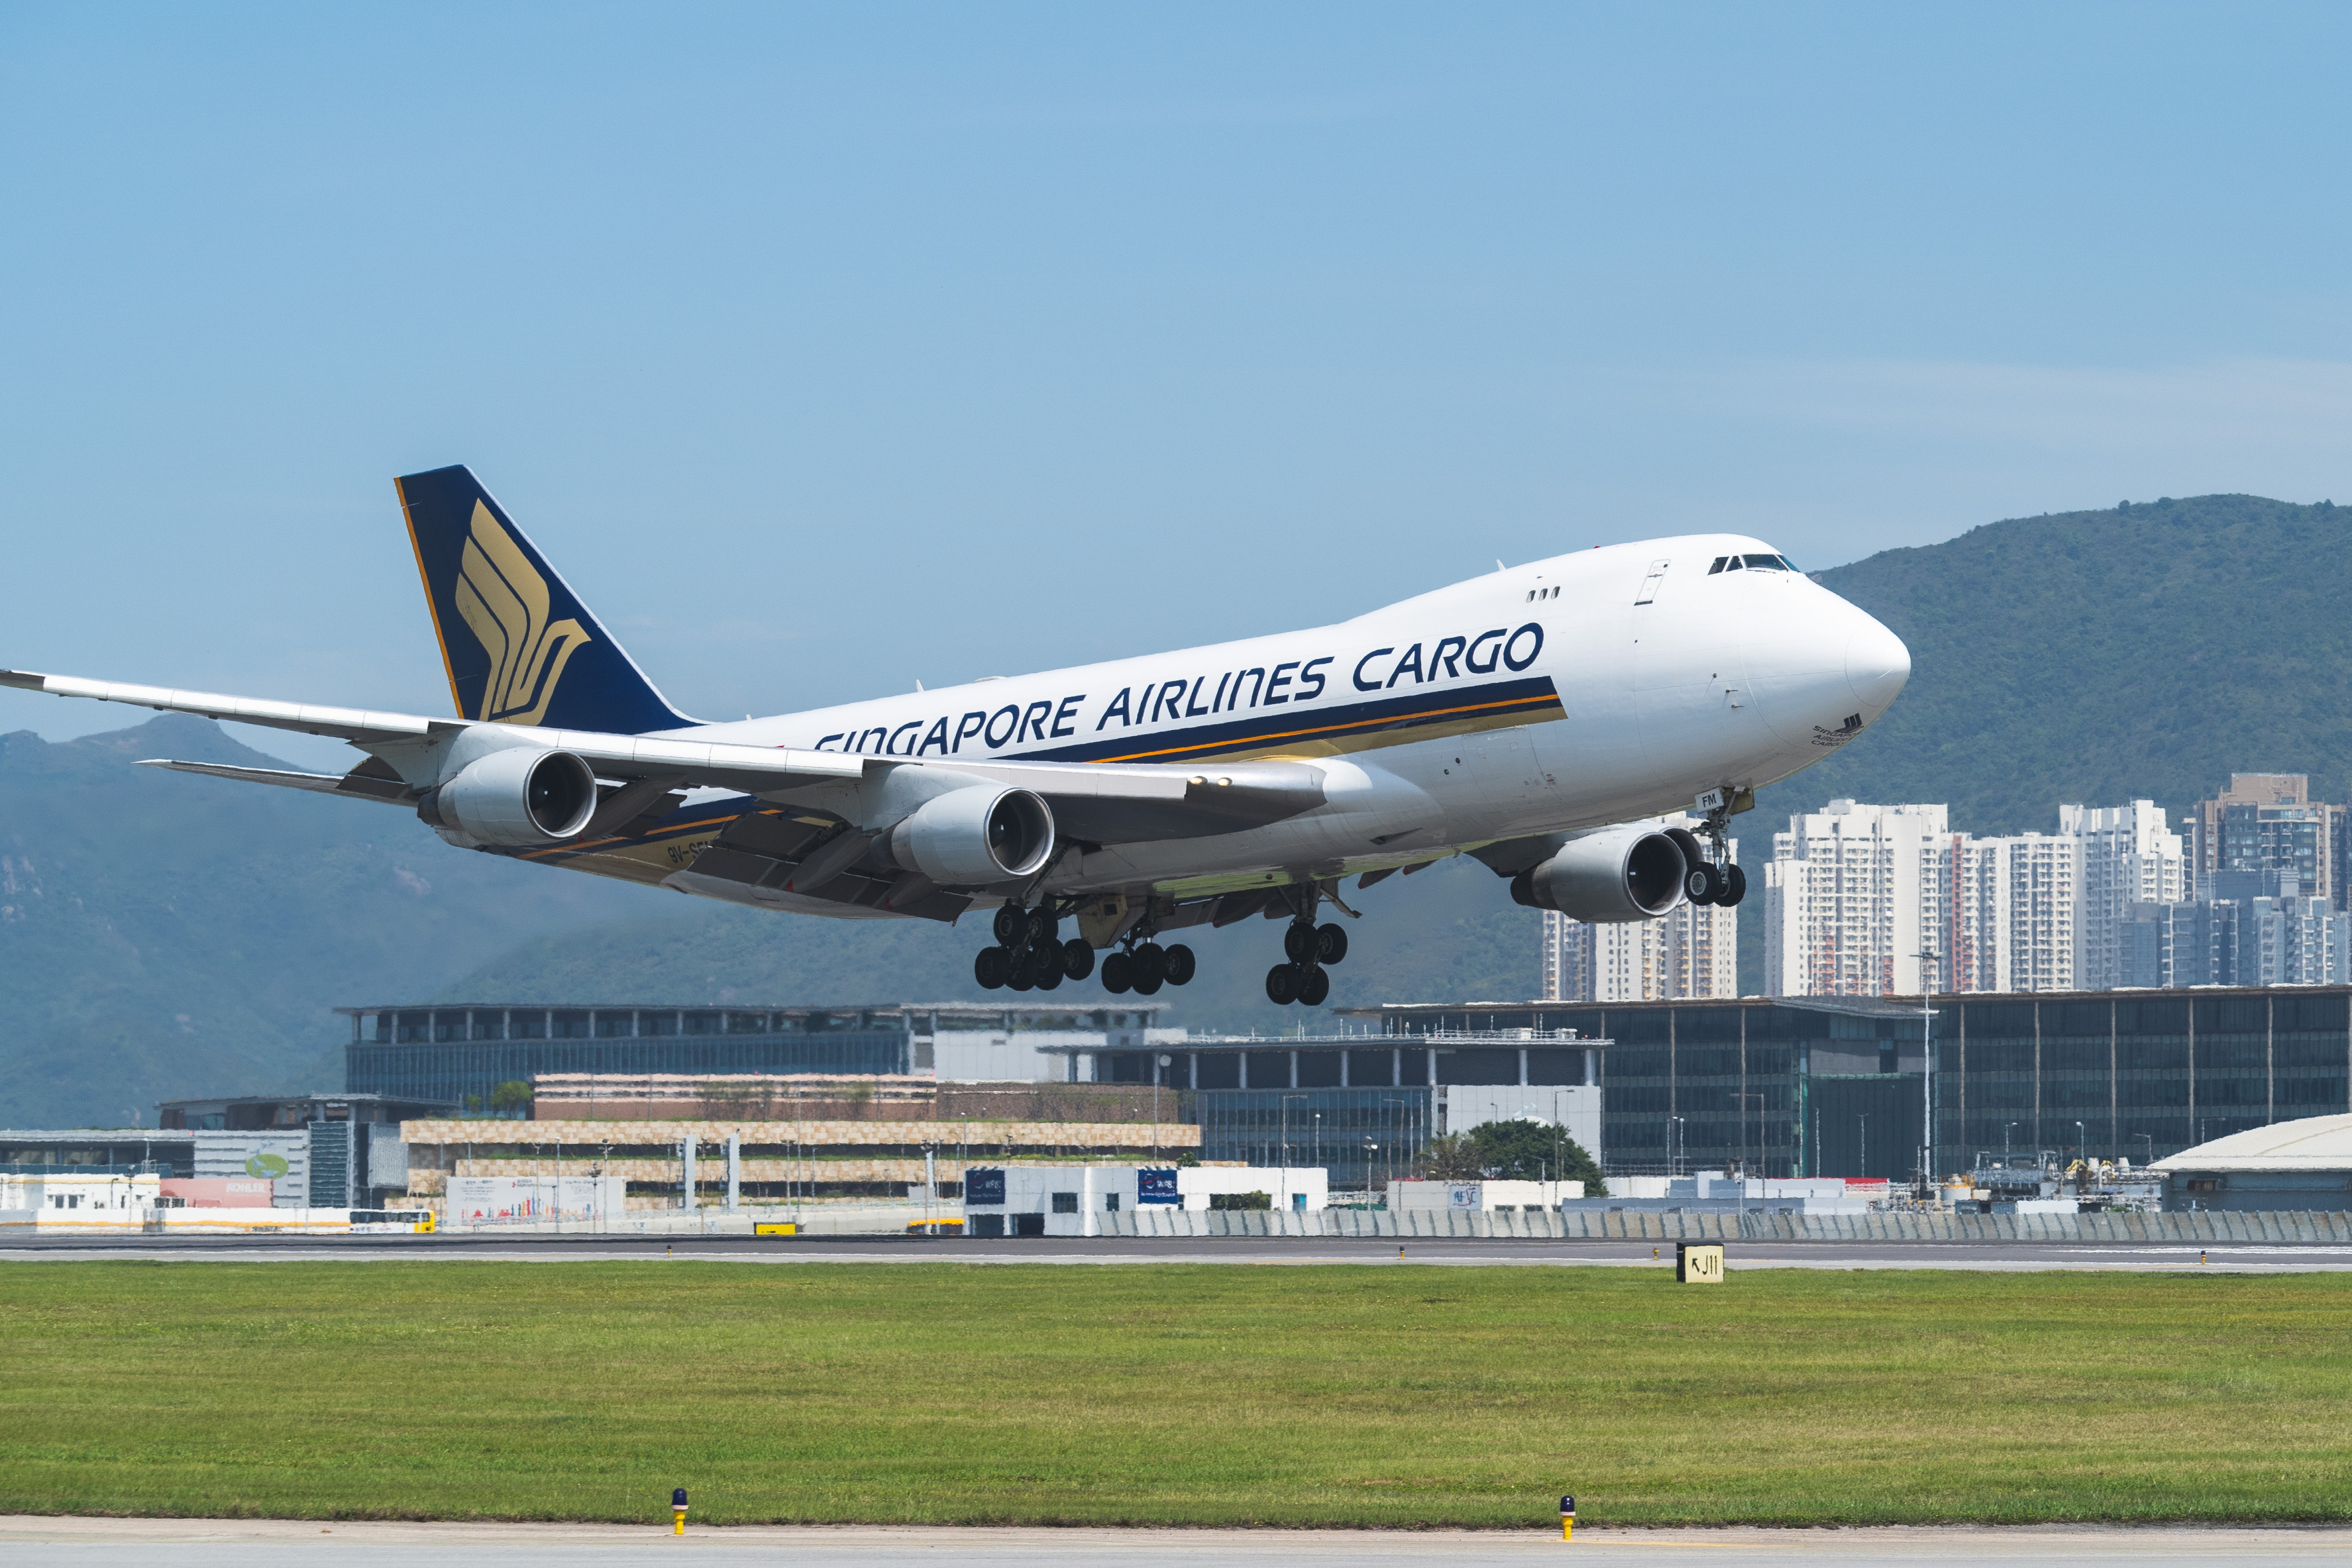 A Singapore Airlines cargo flight was involved in the incident. Shutterstock